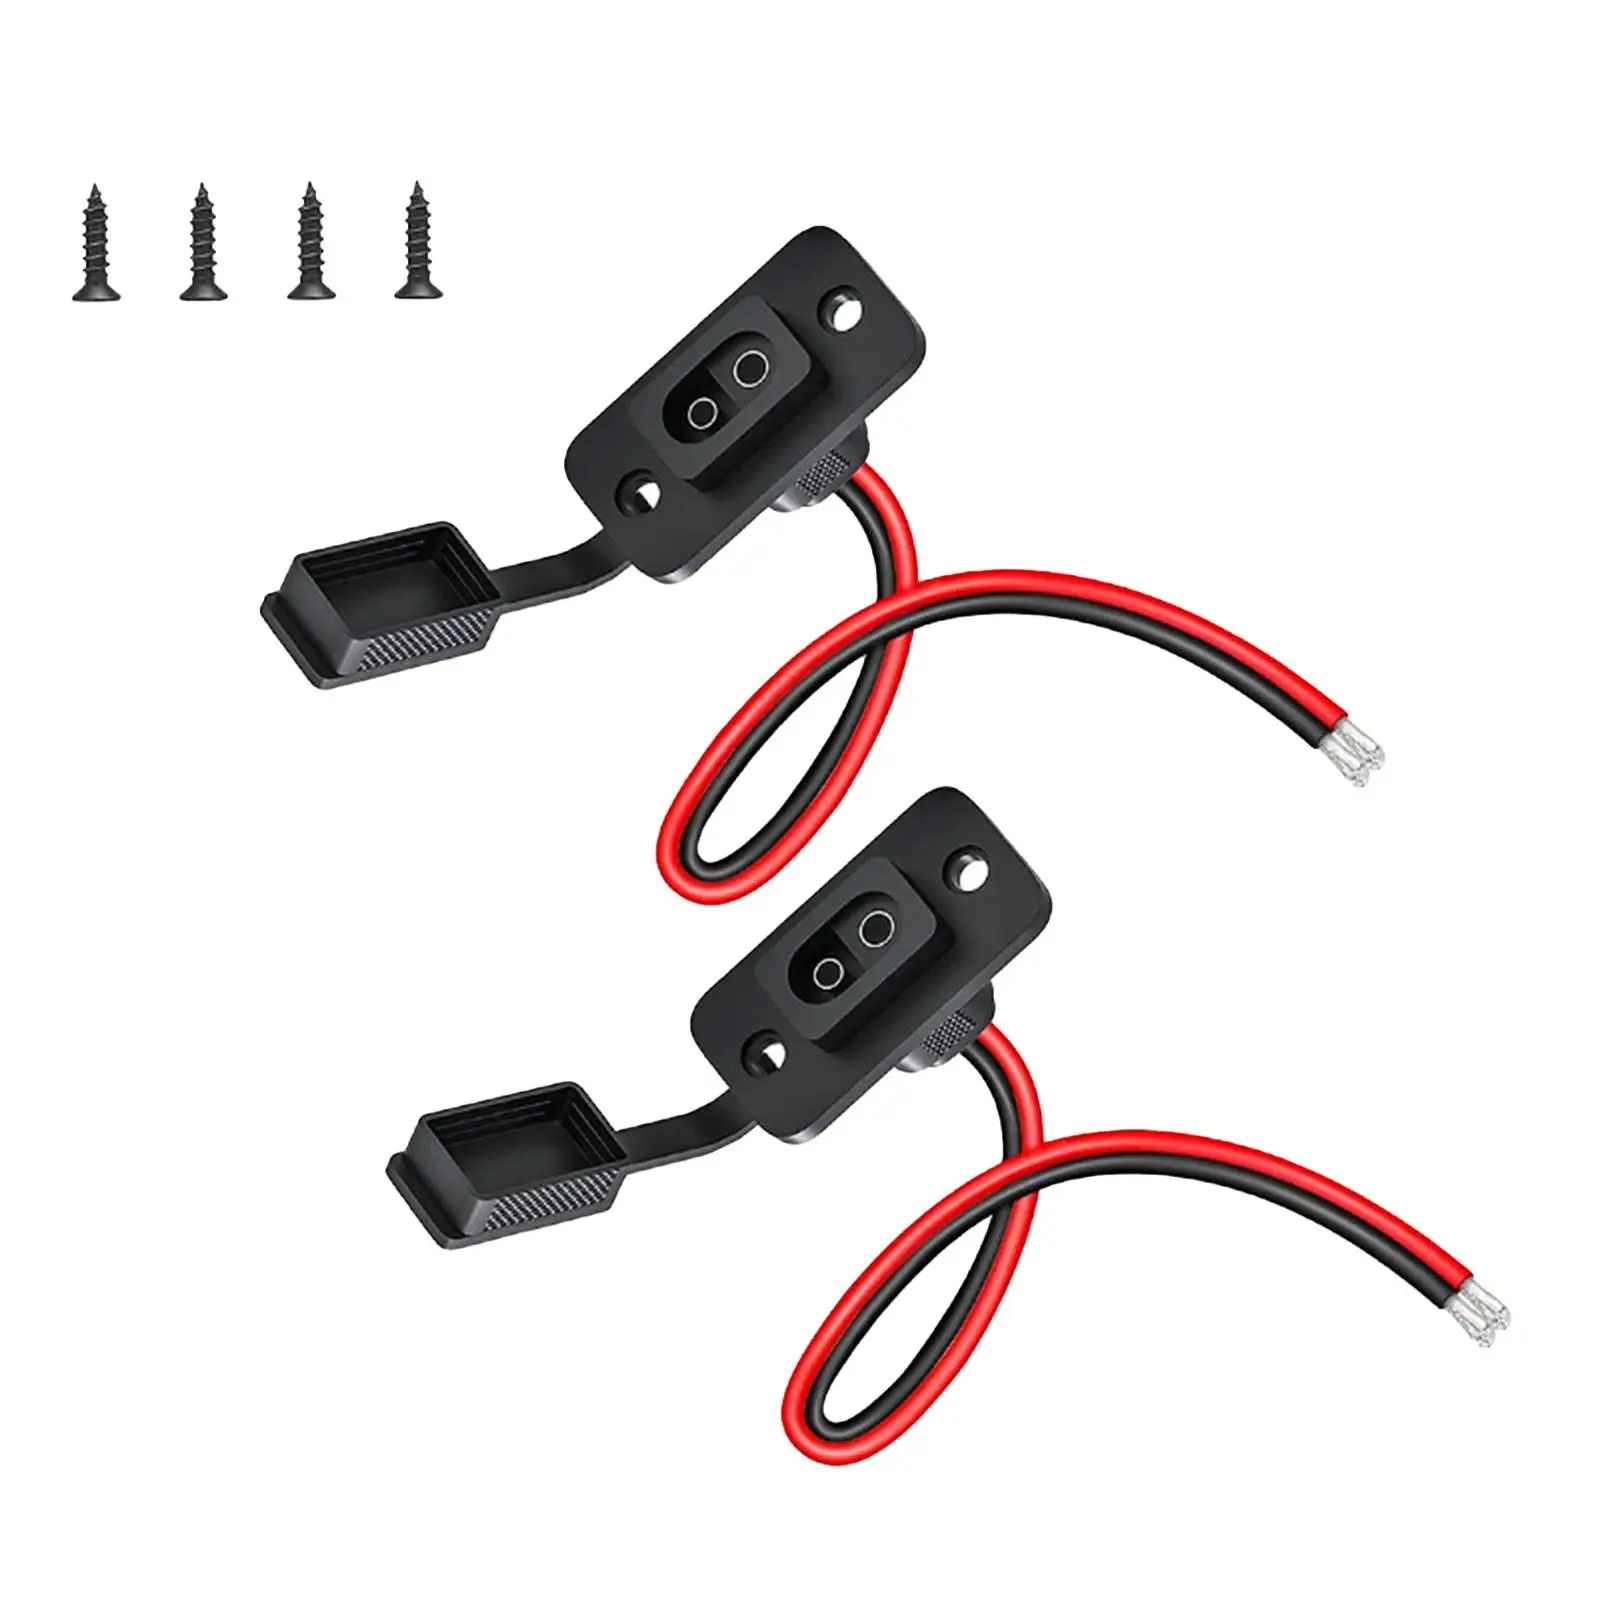 2Pcs SAE Socket Harness 2 Holes Motorcycle Connector Cables Quick Connector Waterproof Cap Tractor Sidewall Port Extension Cord